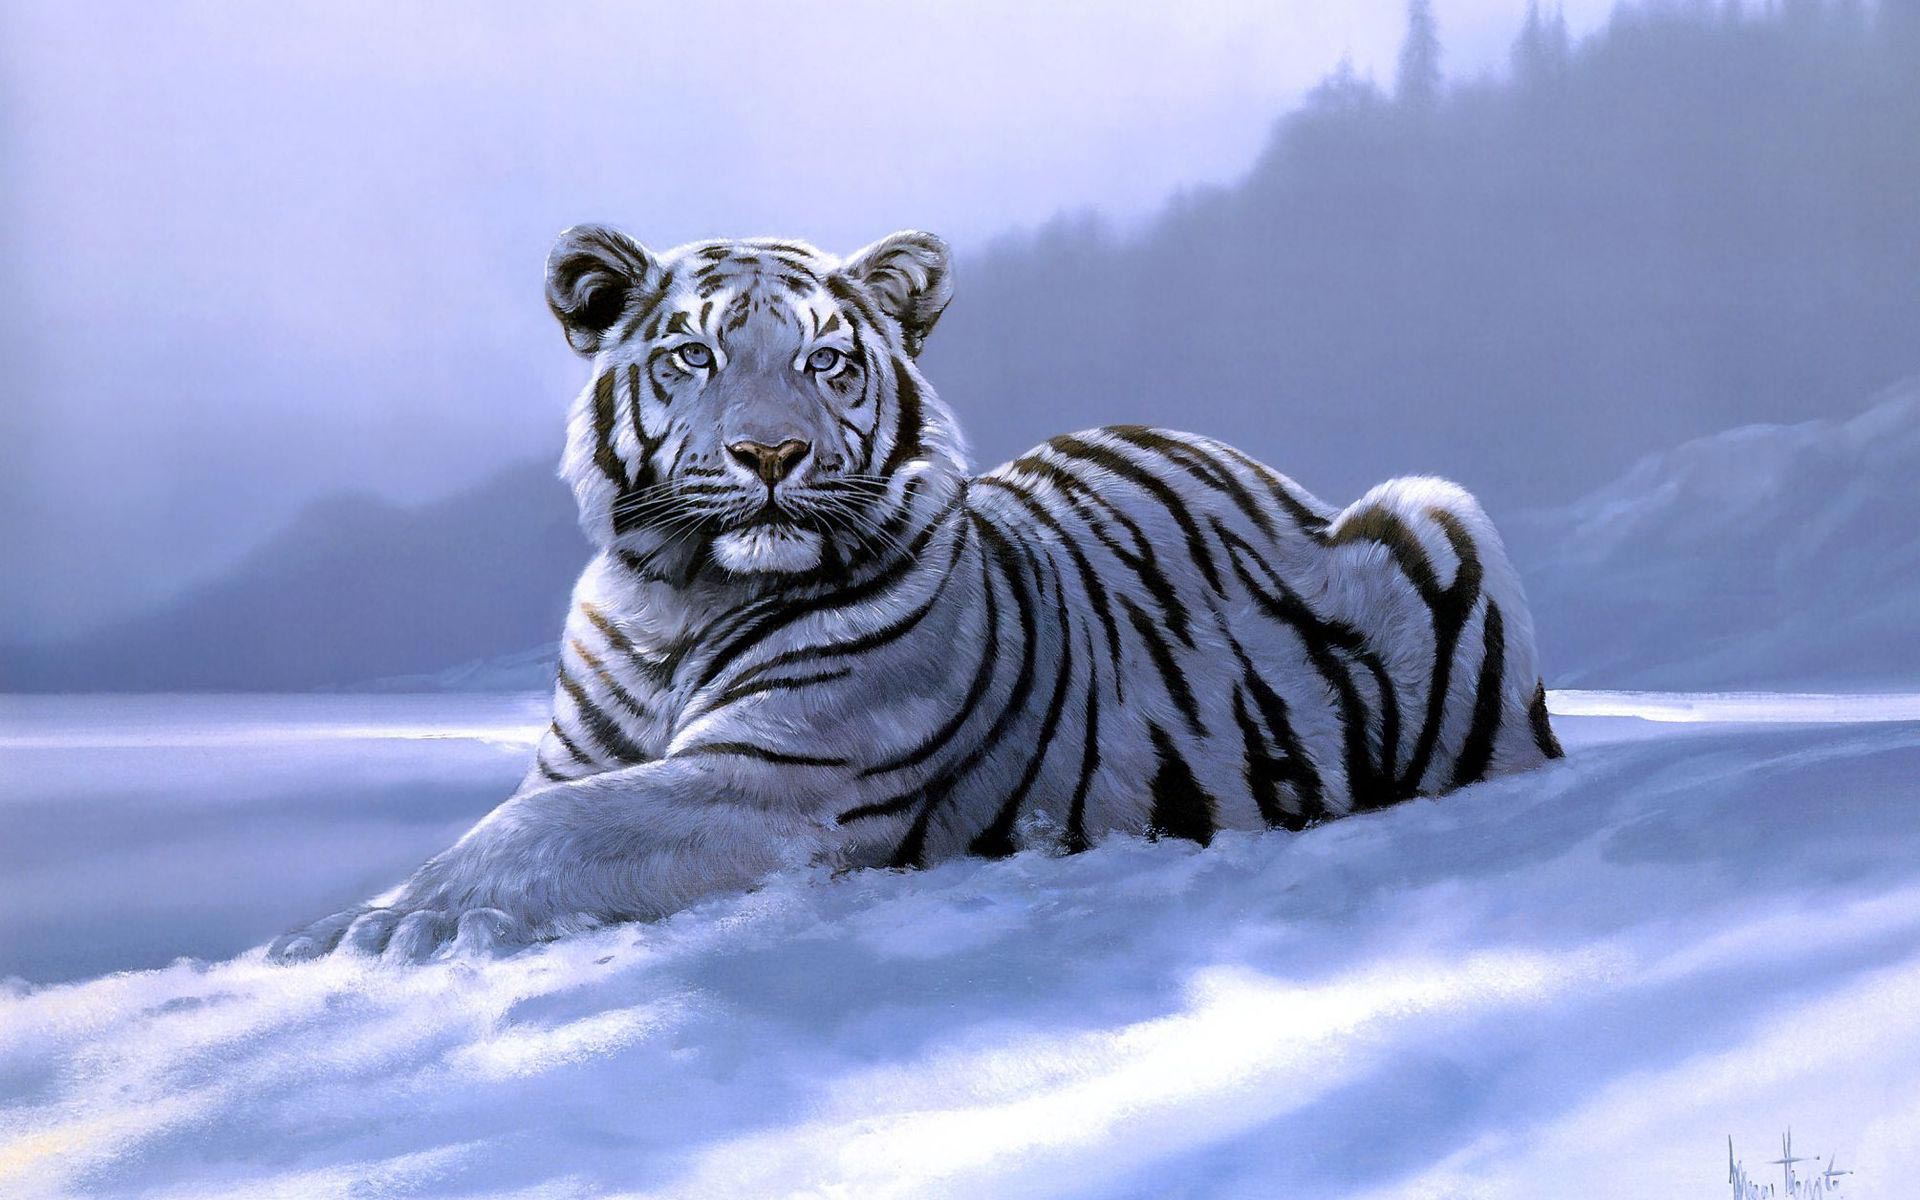  Wallpaper Tiger high quality Backgrounds for mobile iphone